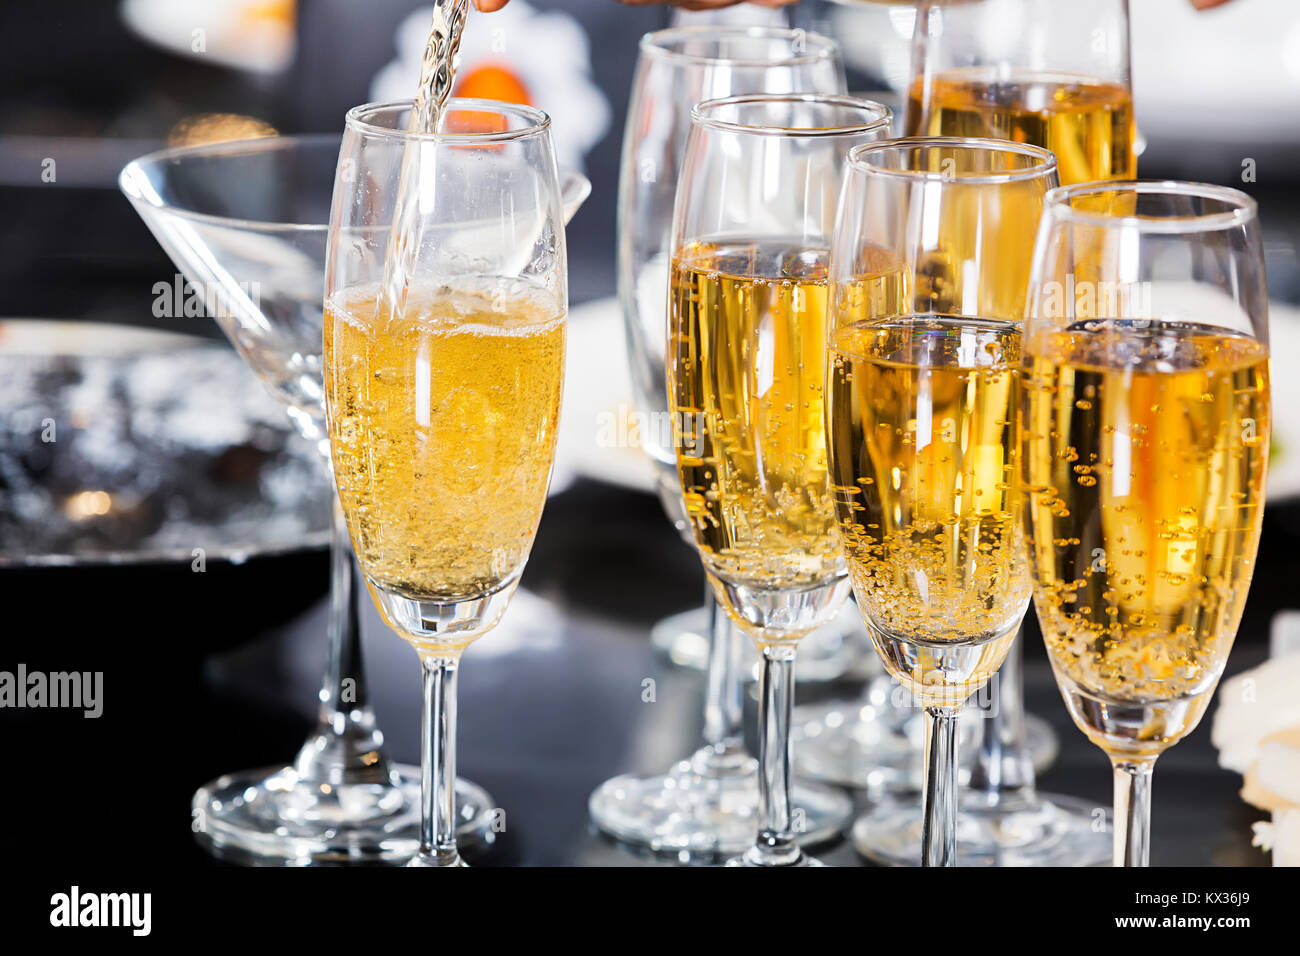 Champagne glasses on table. Celebration concept. Alcohol and cocktail party Stock Photo